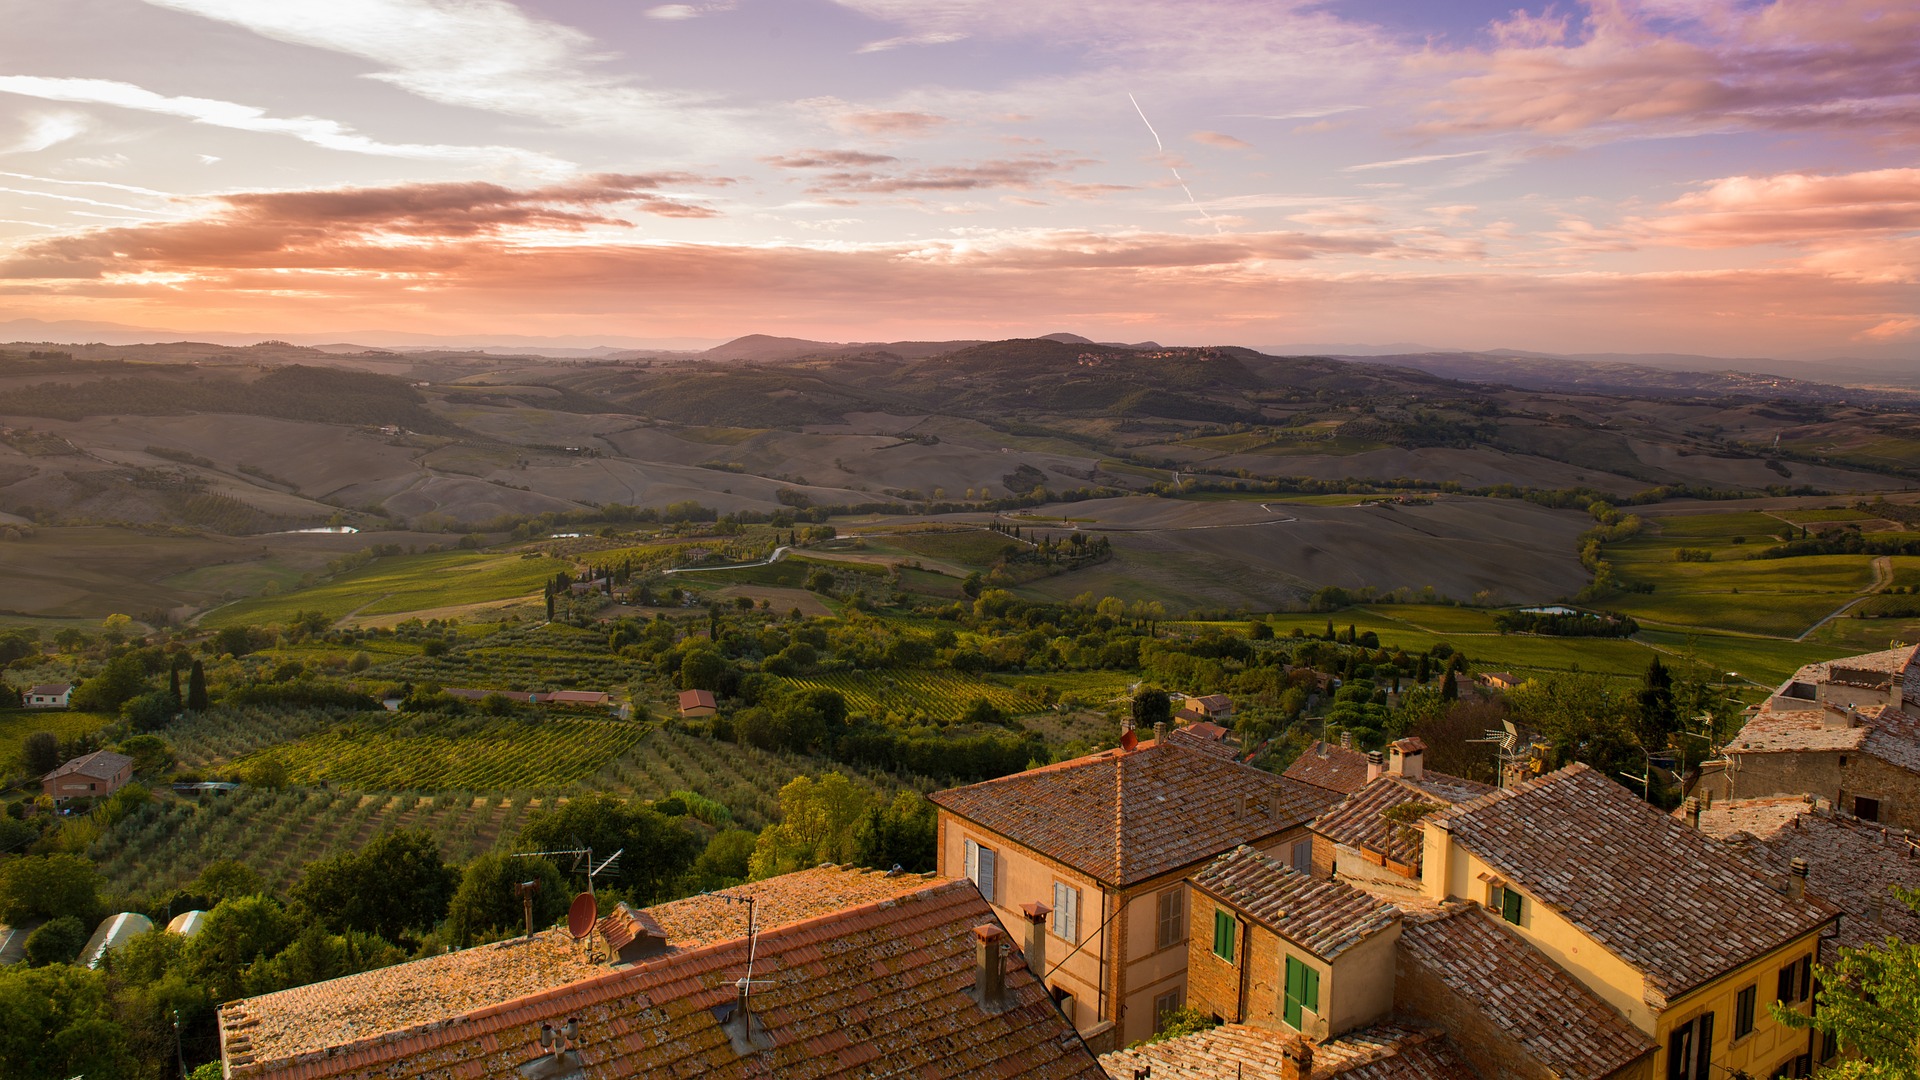 A Tuscan Treasure Trove… and A Trip To Remember